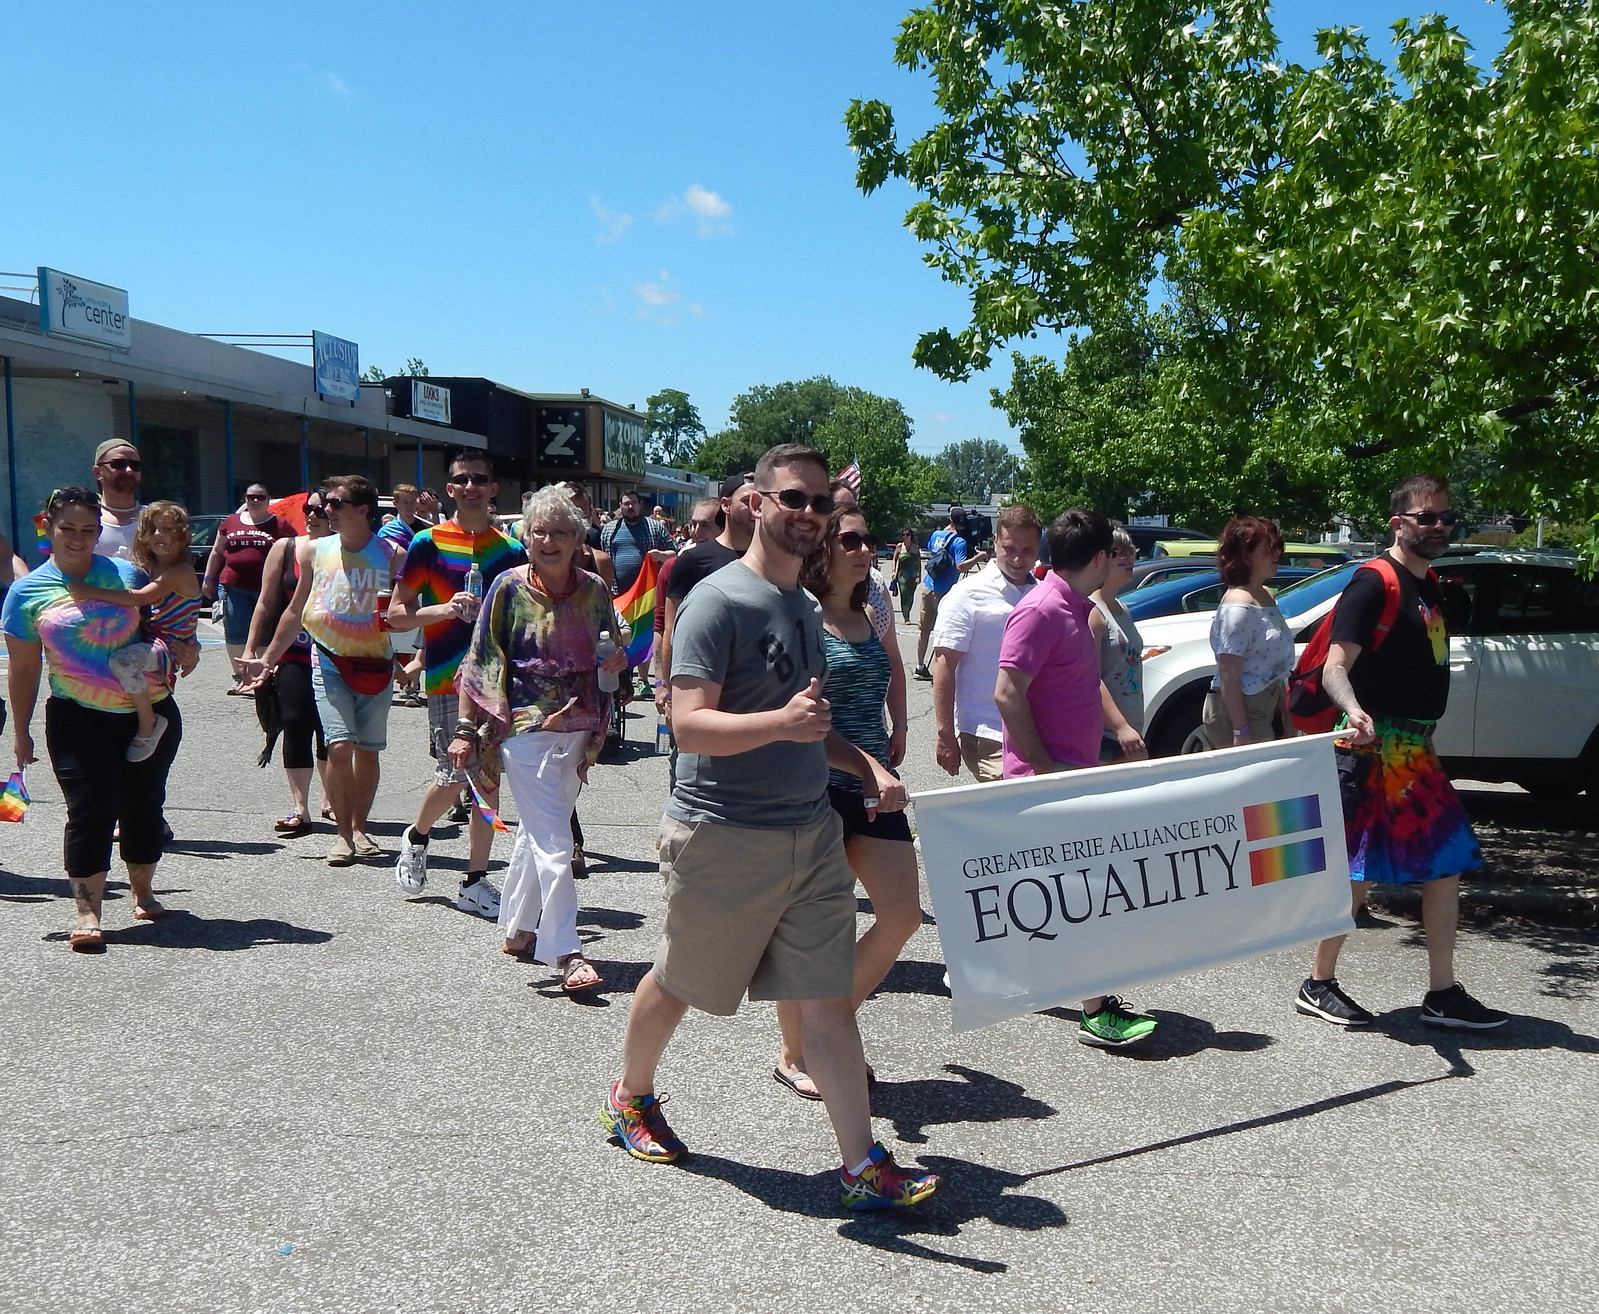 Greater Erie Allaince for Equality steps off in Pride Parade